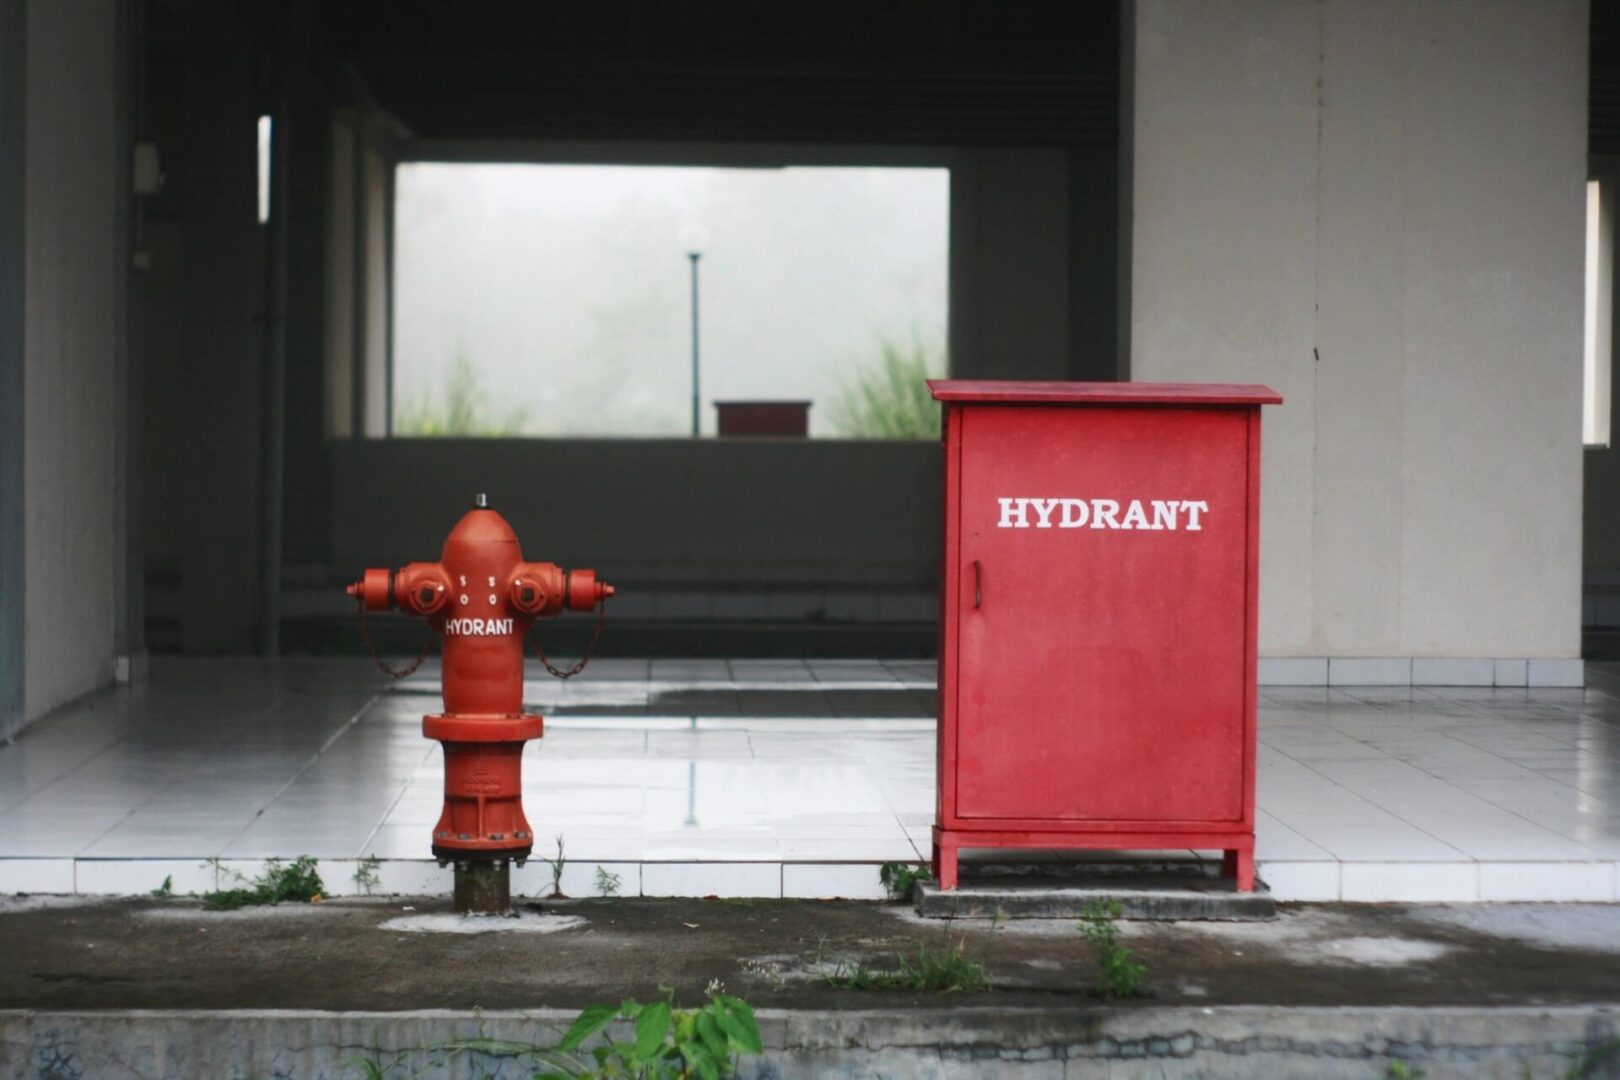 A red fire hydrant next to a red cabinet.